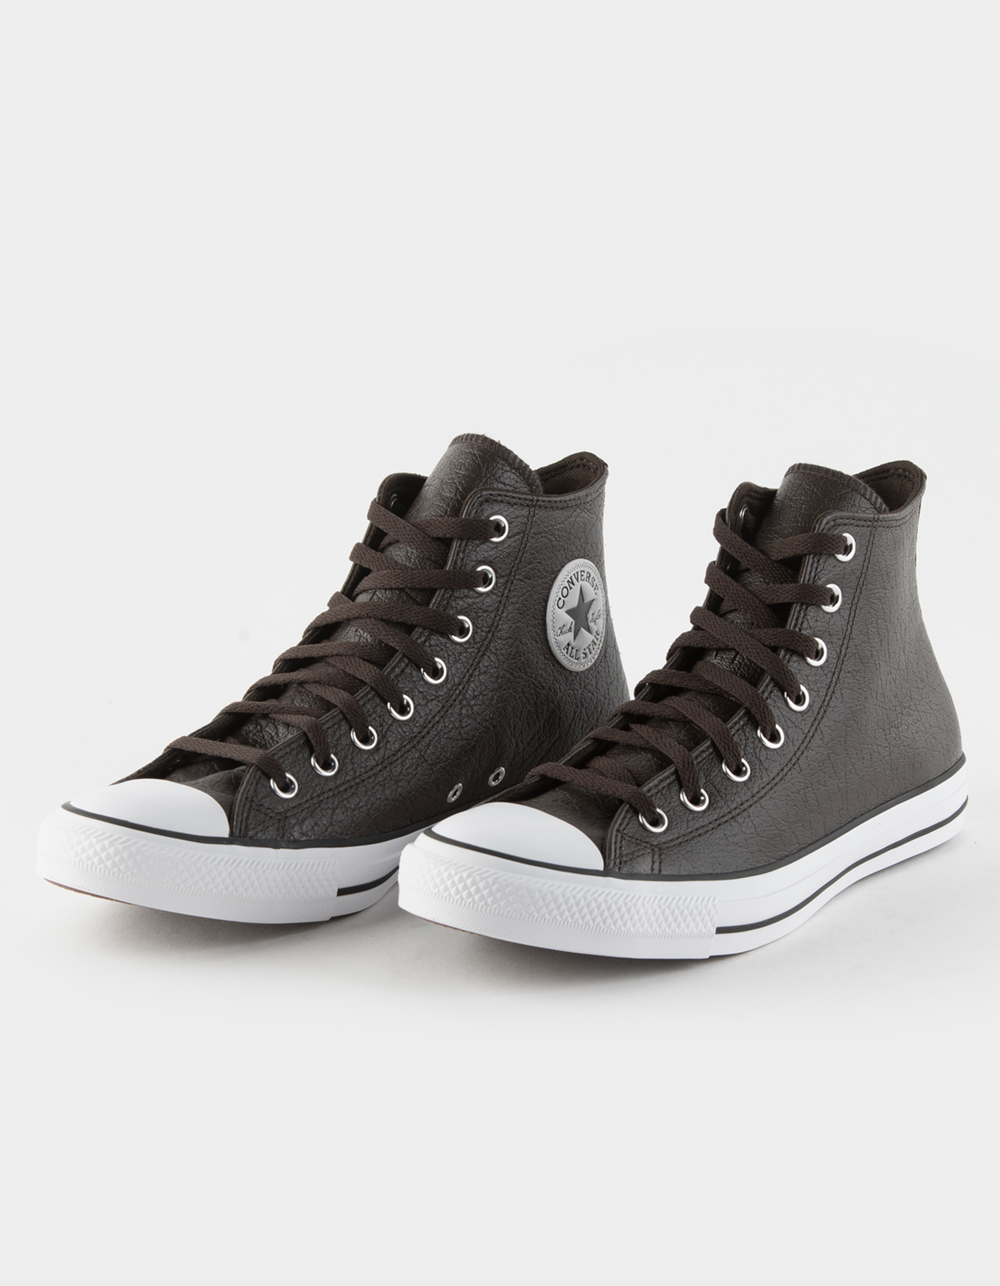 Converse Chuck Taylor All Star Hi leather trainers in dark brown